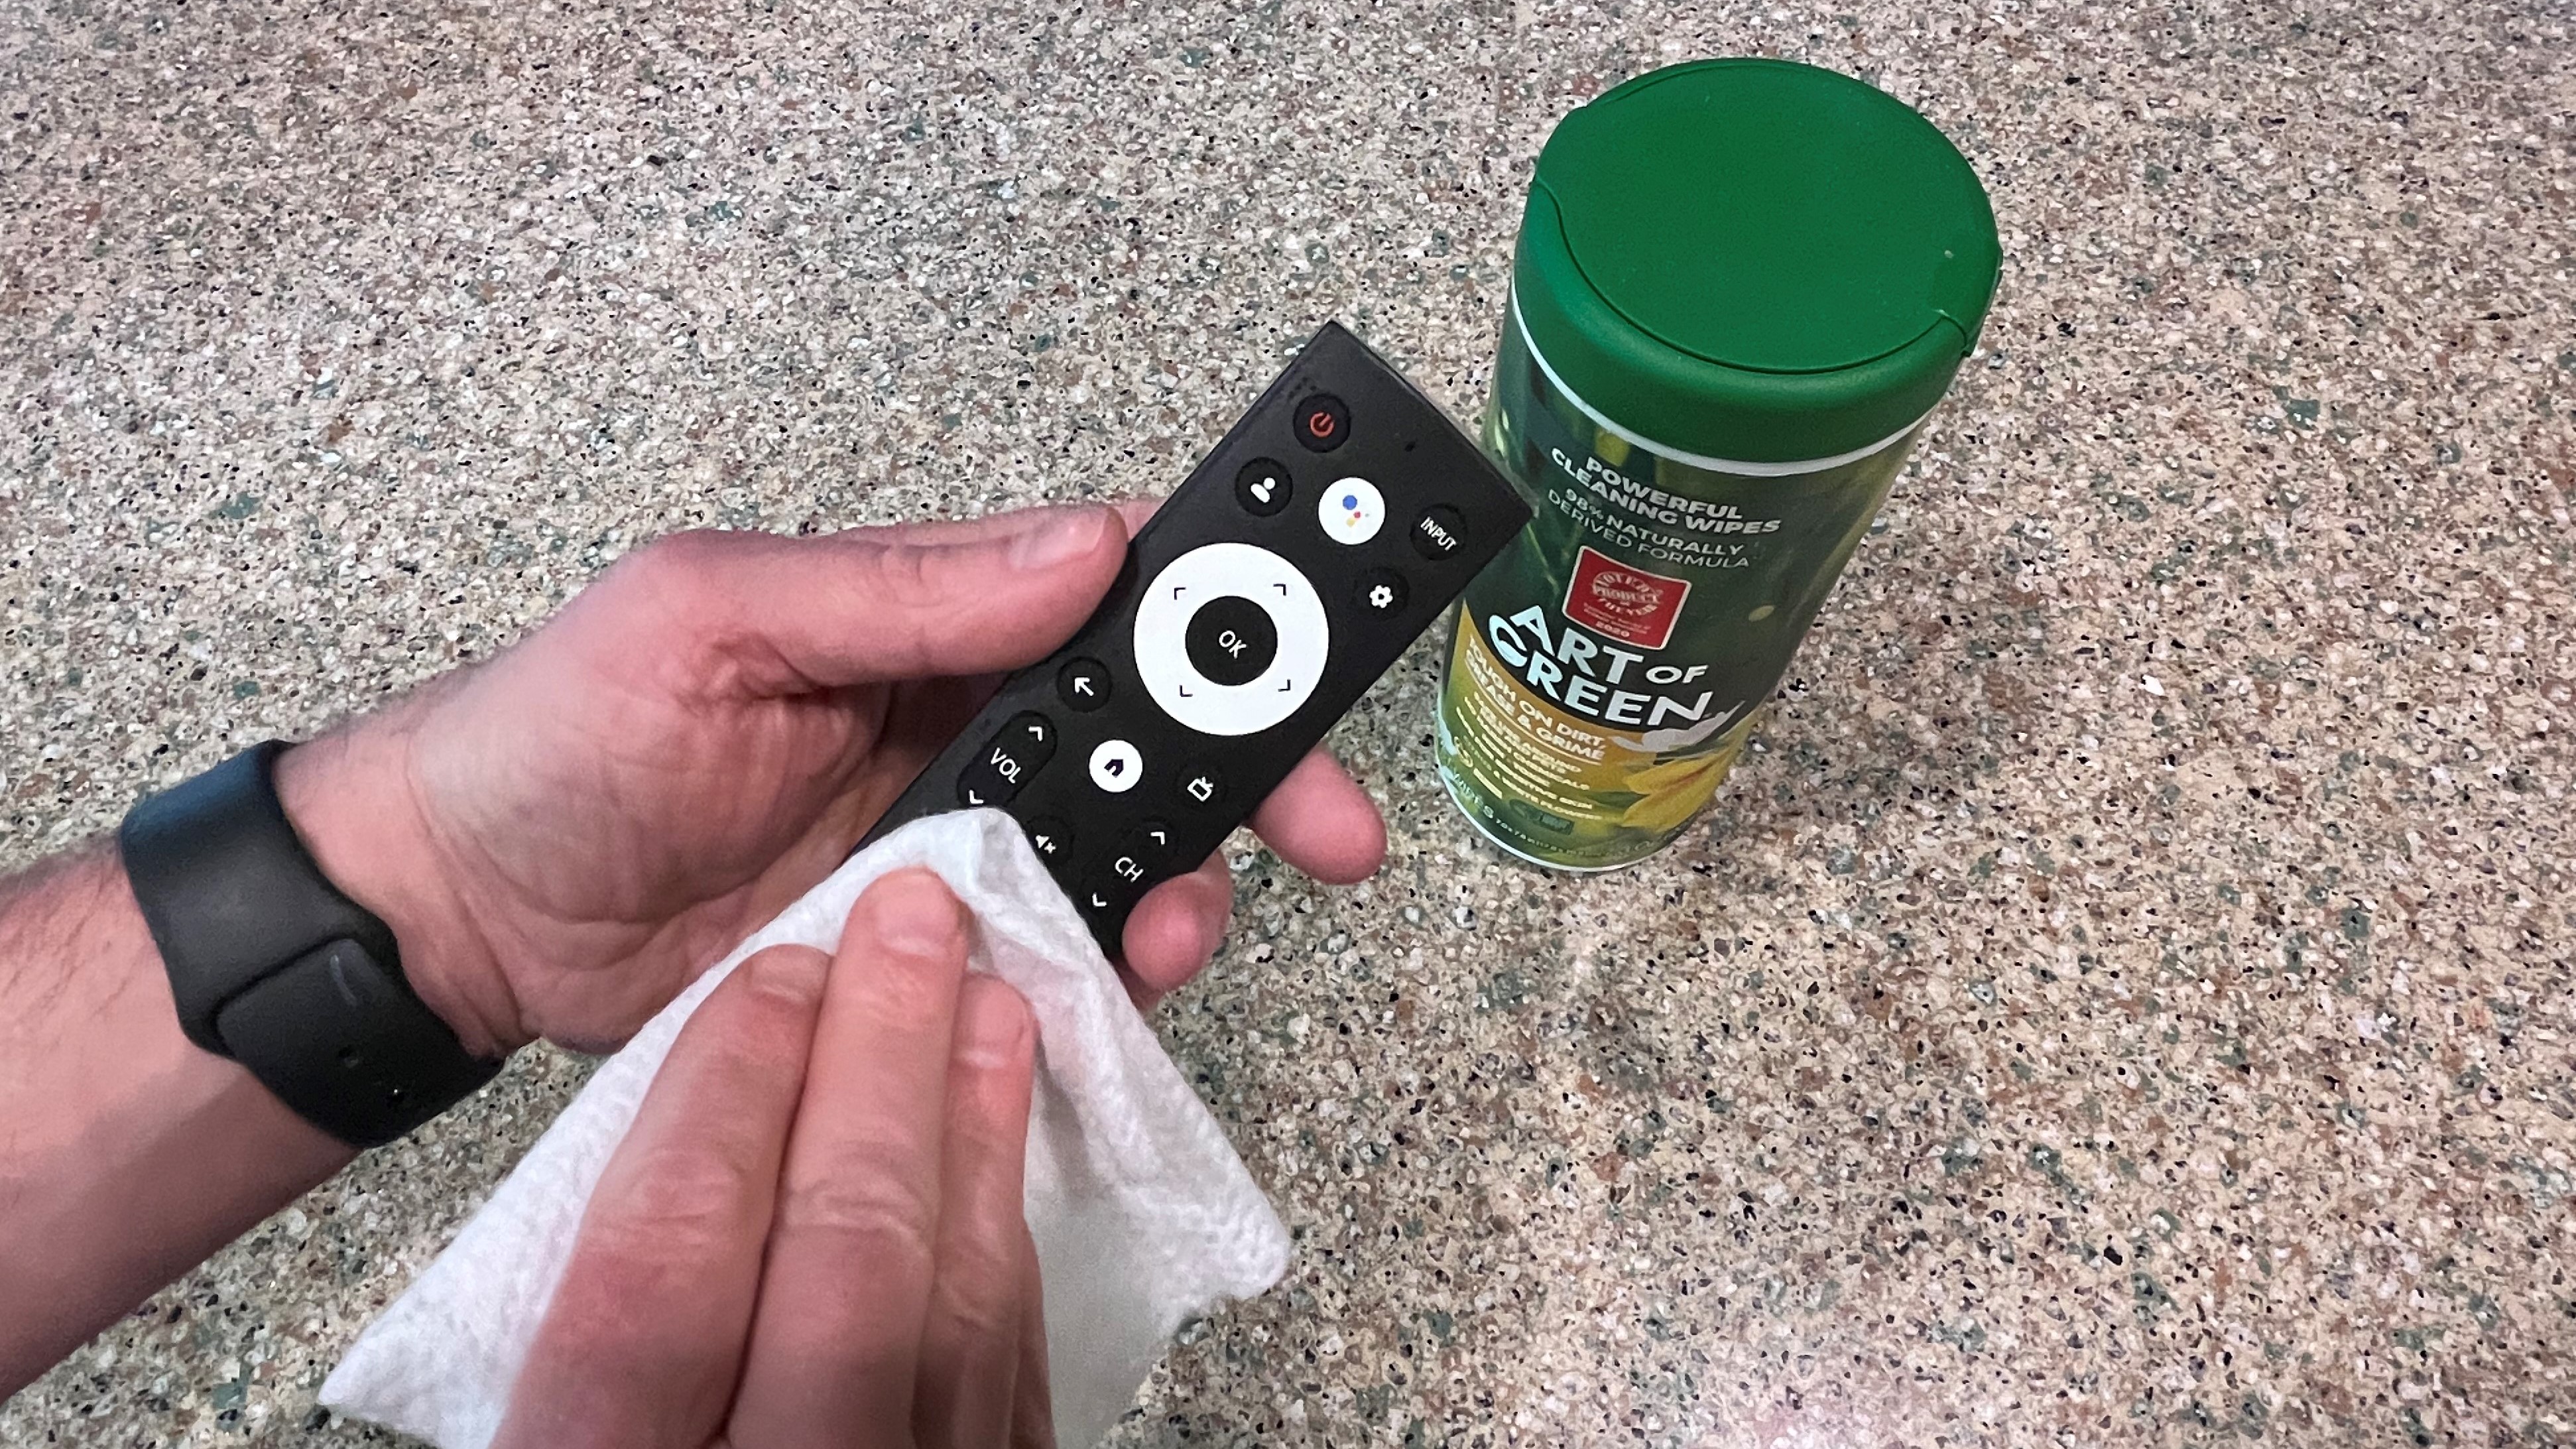 hand wiping remote control to clean it with wipes container in background